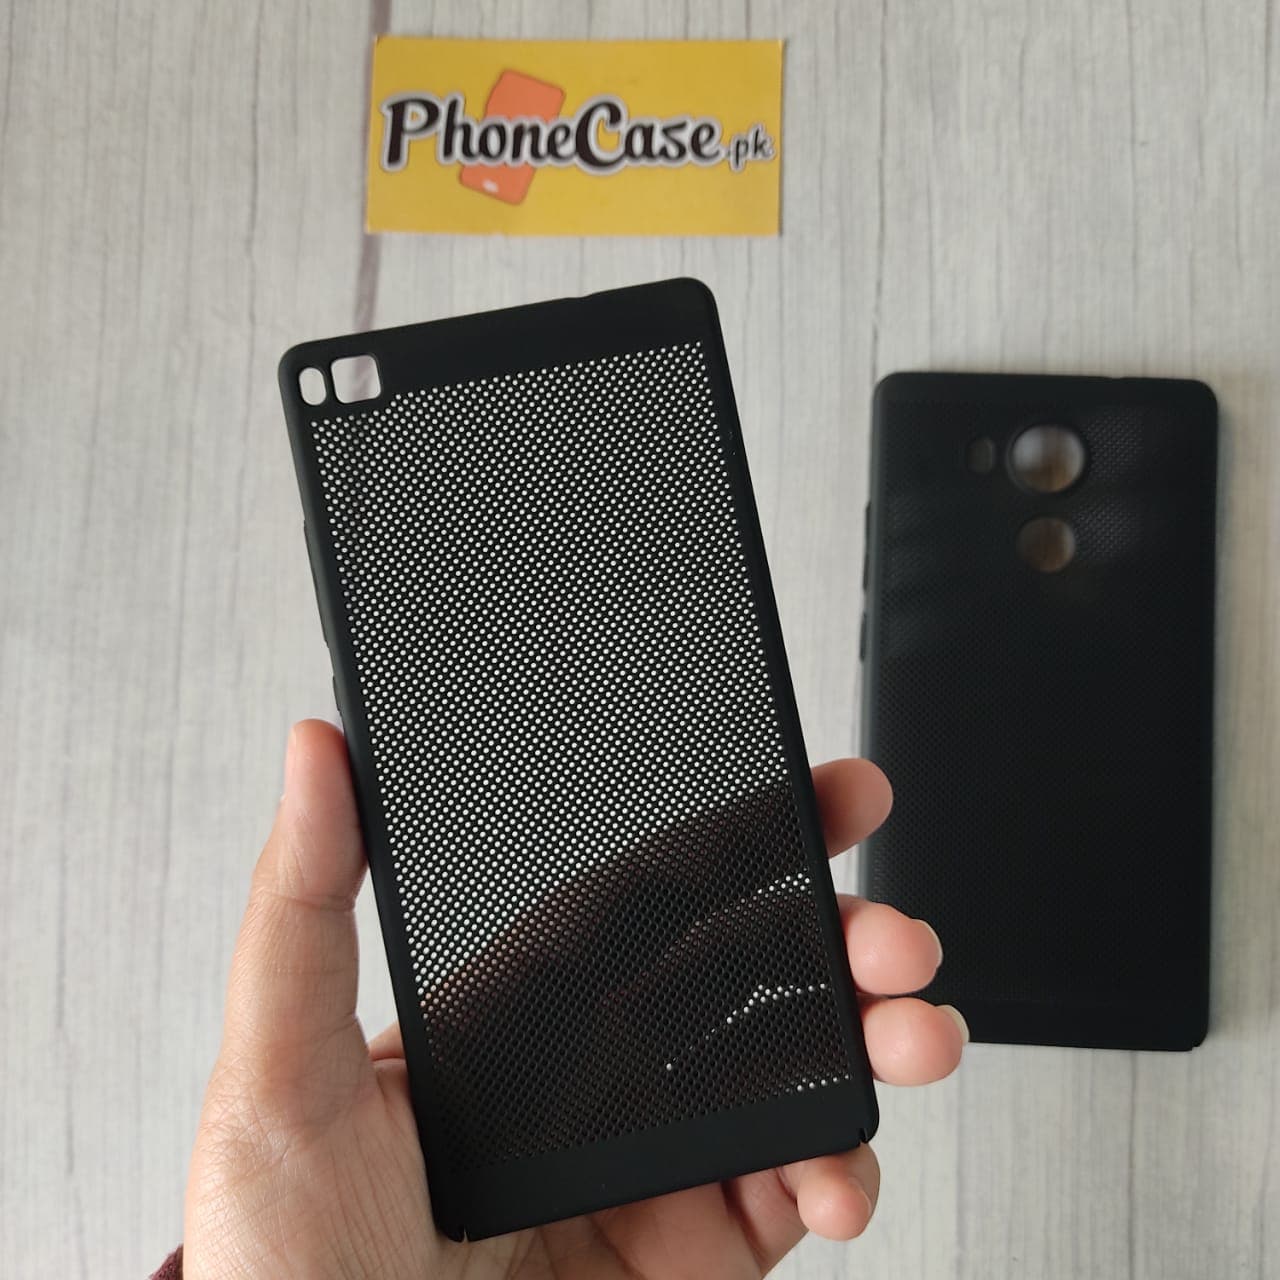 ANTI-HEAT SHOCK PROOF CASE FOR Huawei All models 